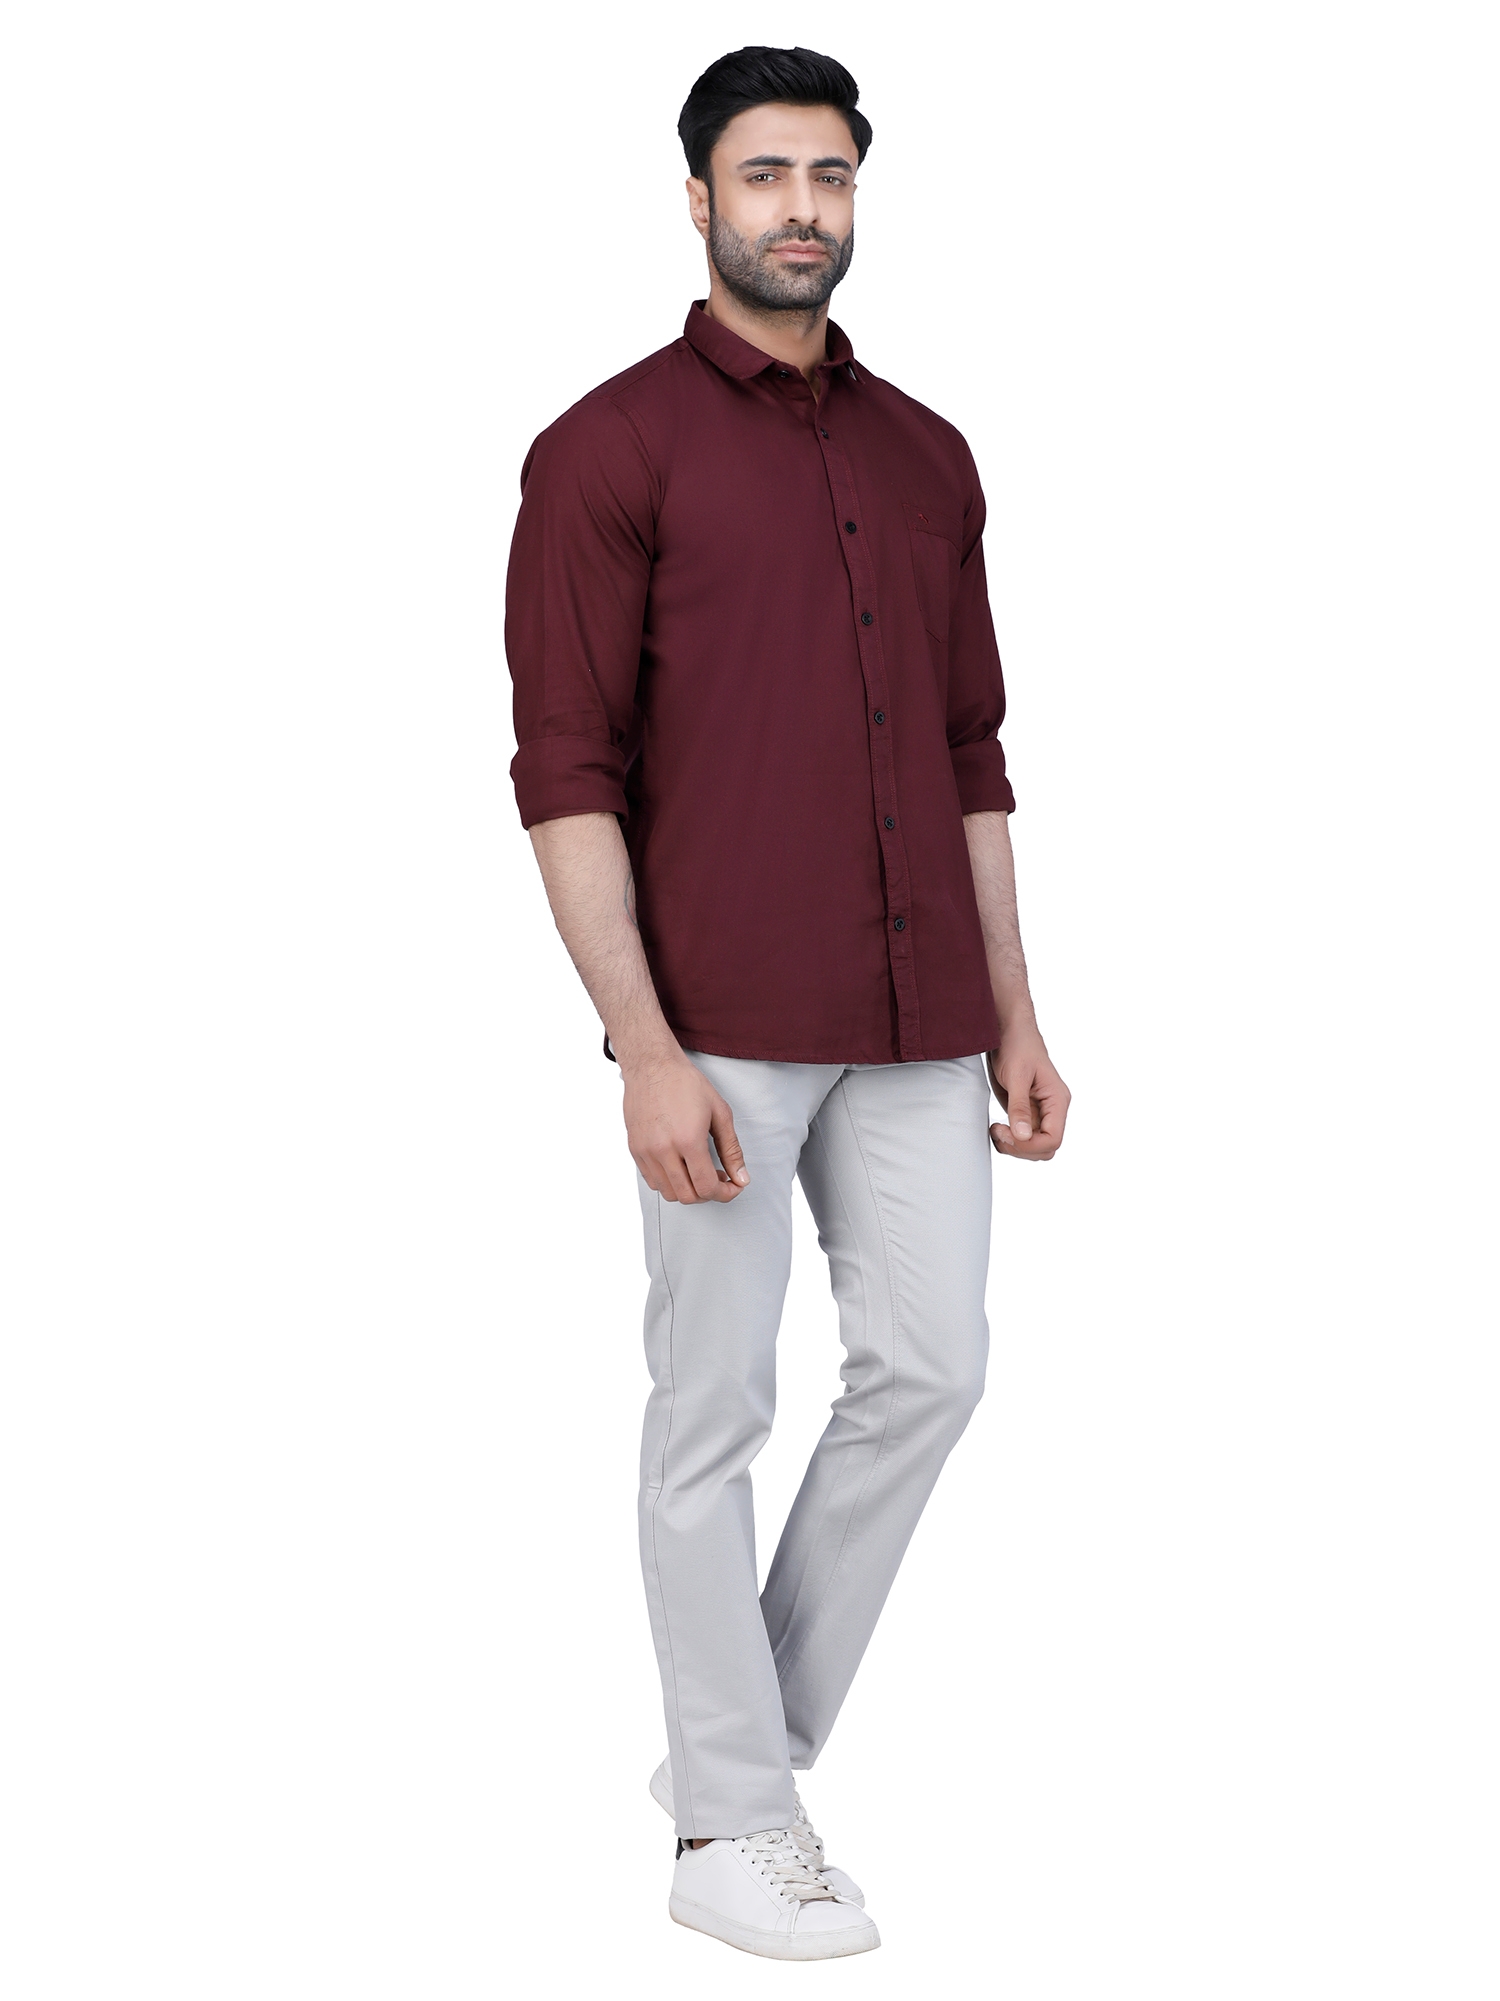 D'cot by Donear Men Red Cotton Slim Solid Casual Shirts